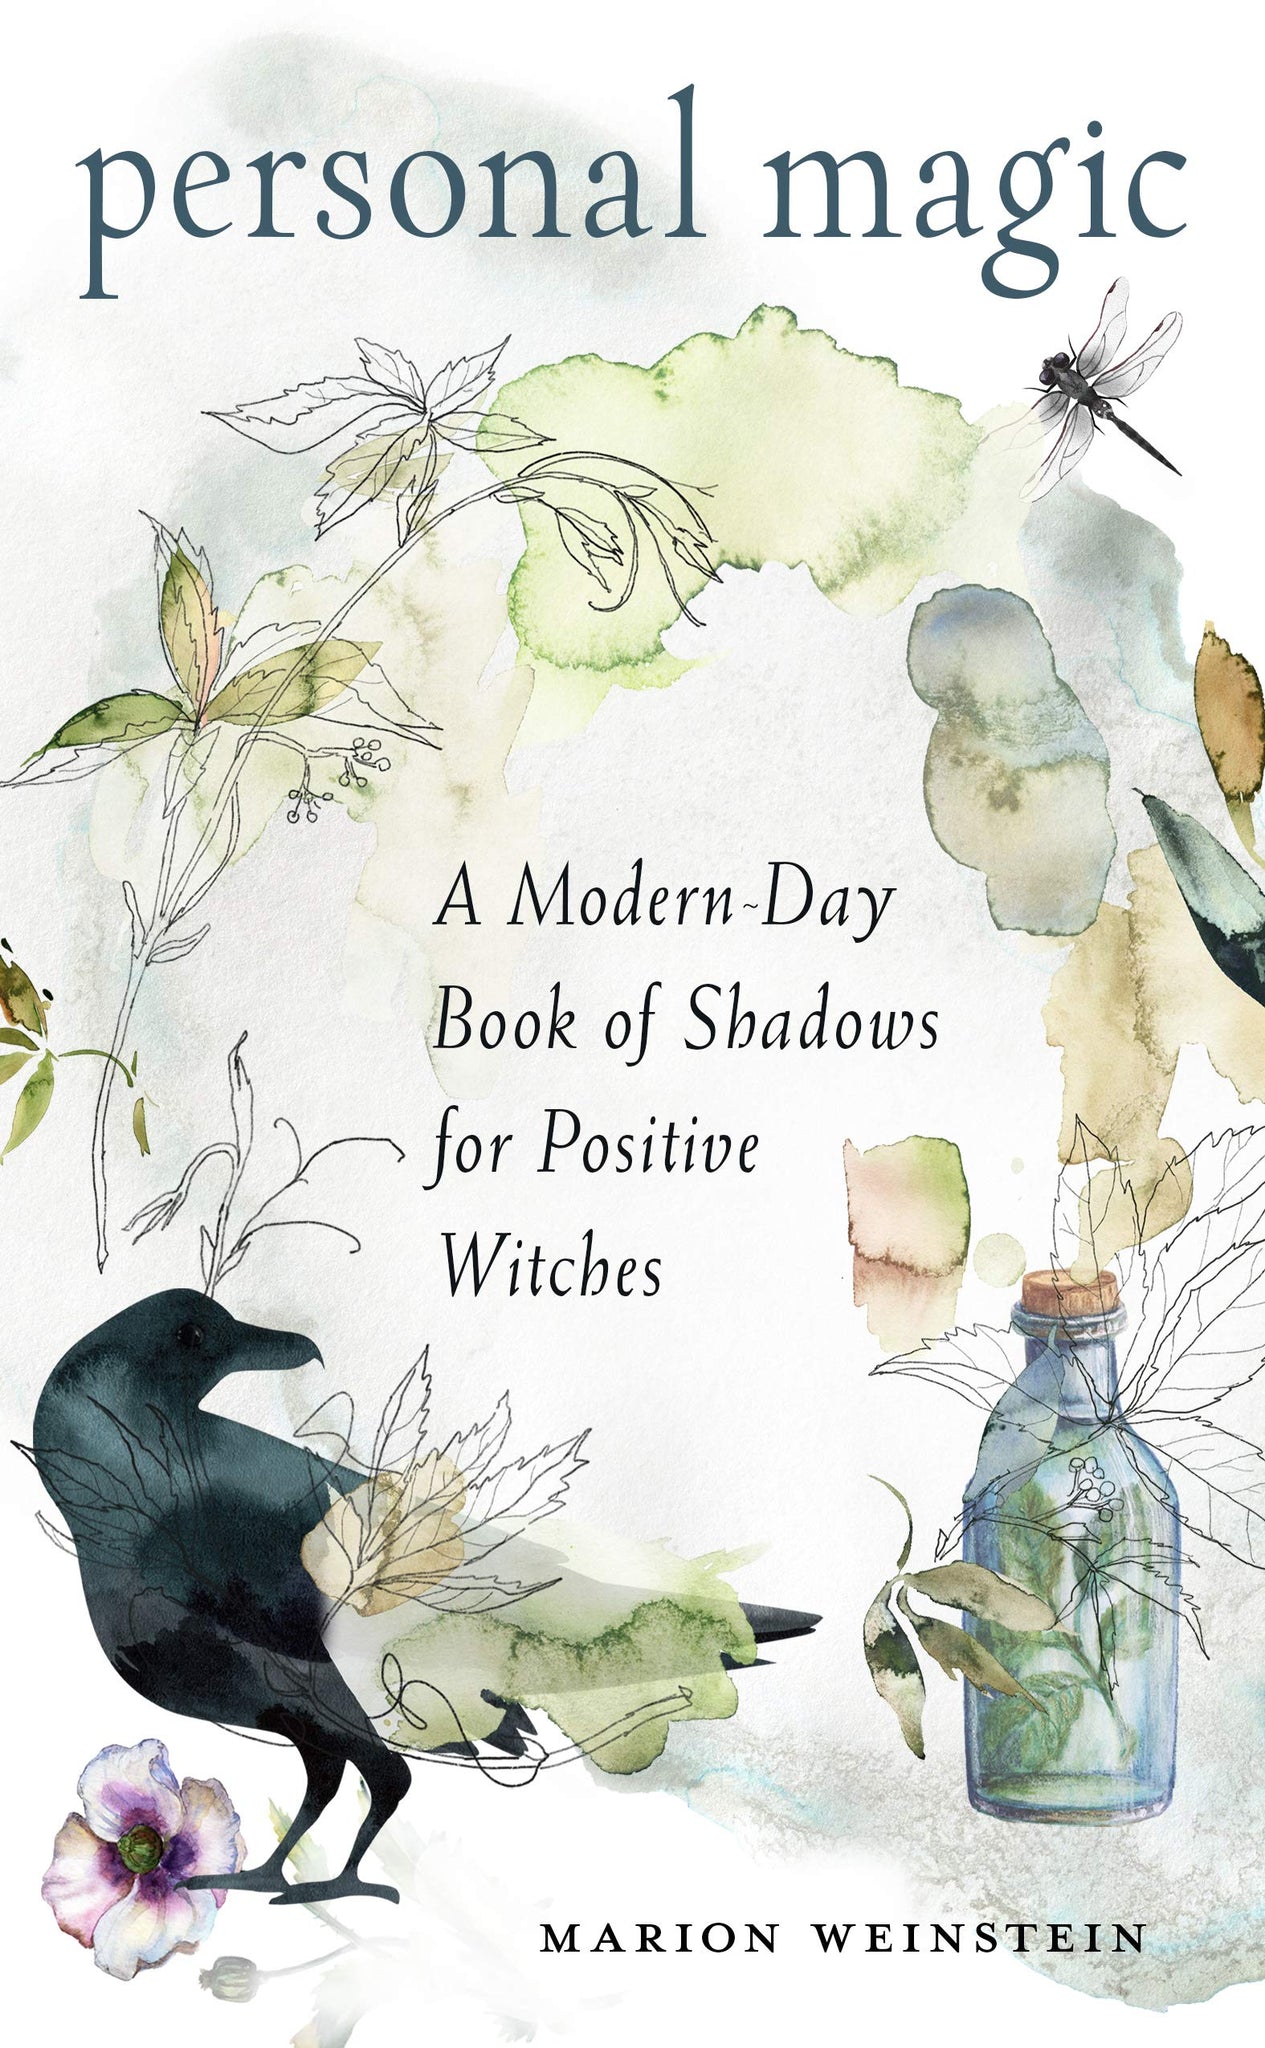 Personal Magic A Modern Day Book of Shadows for Positive Witches by Marion Weinstein